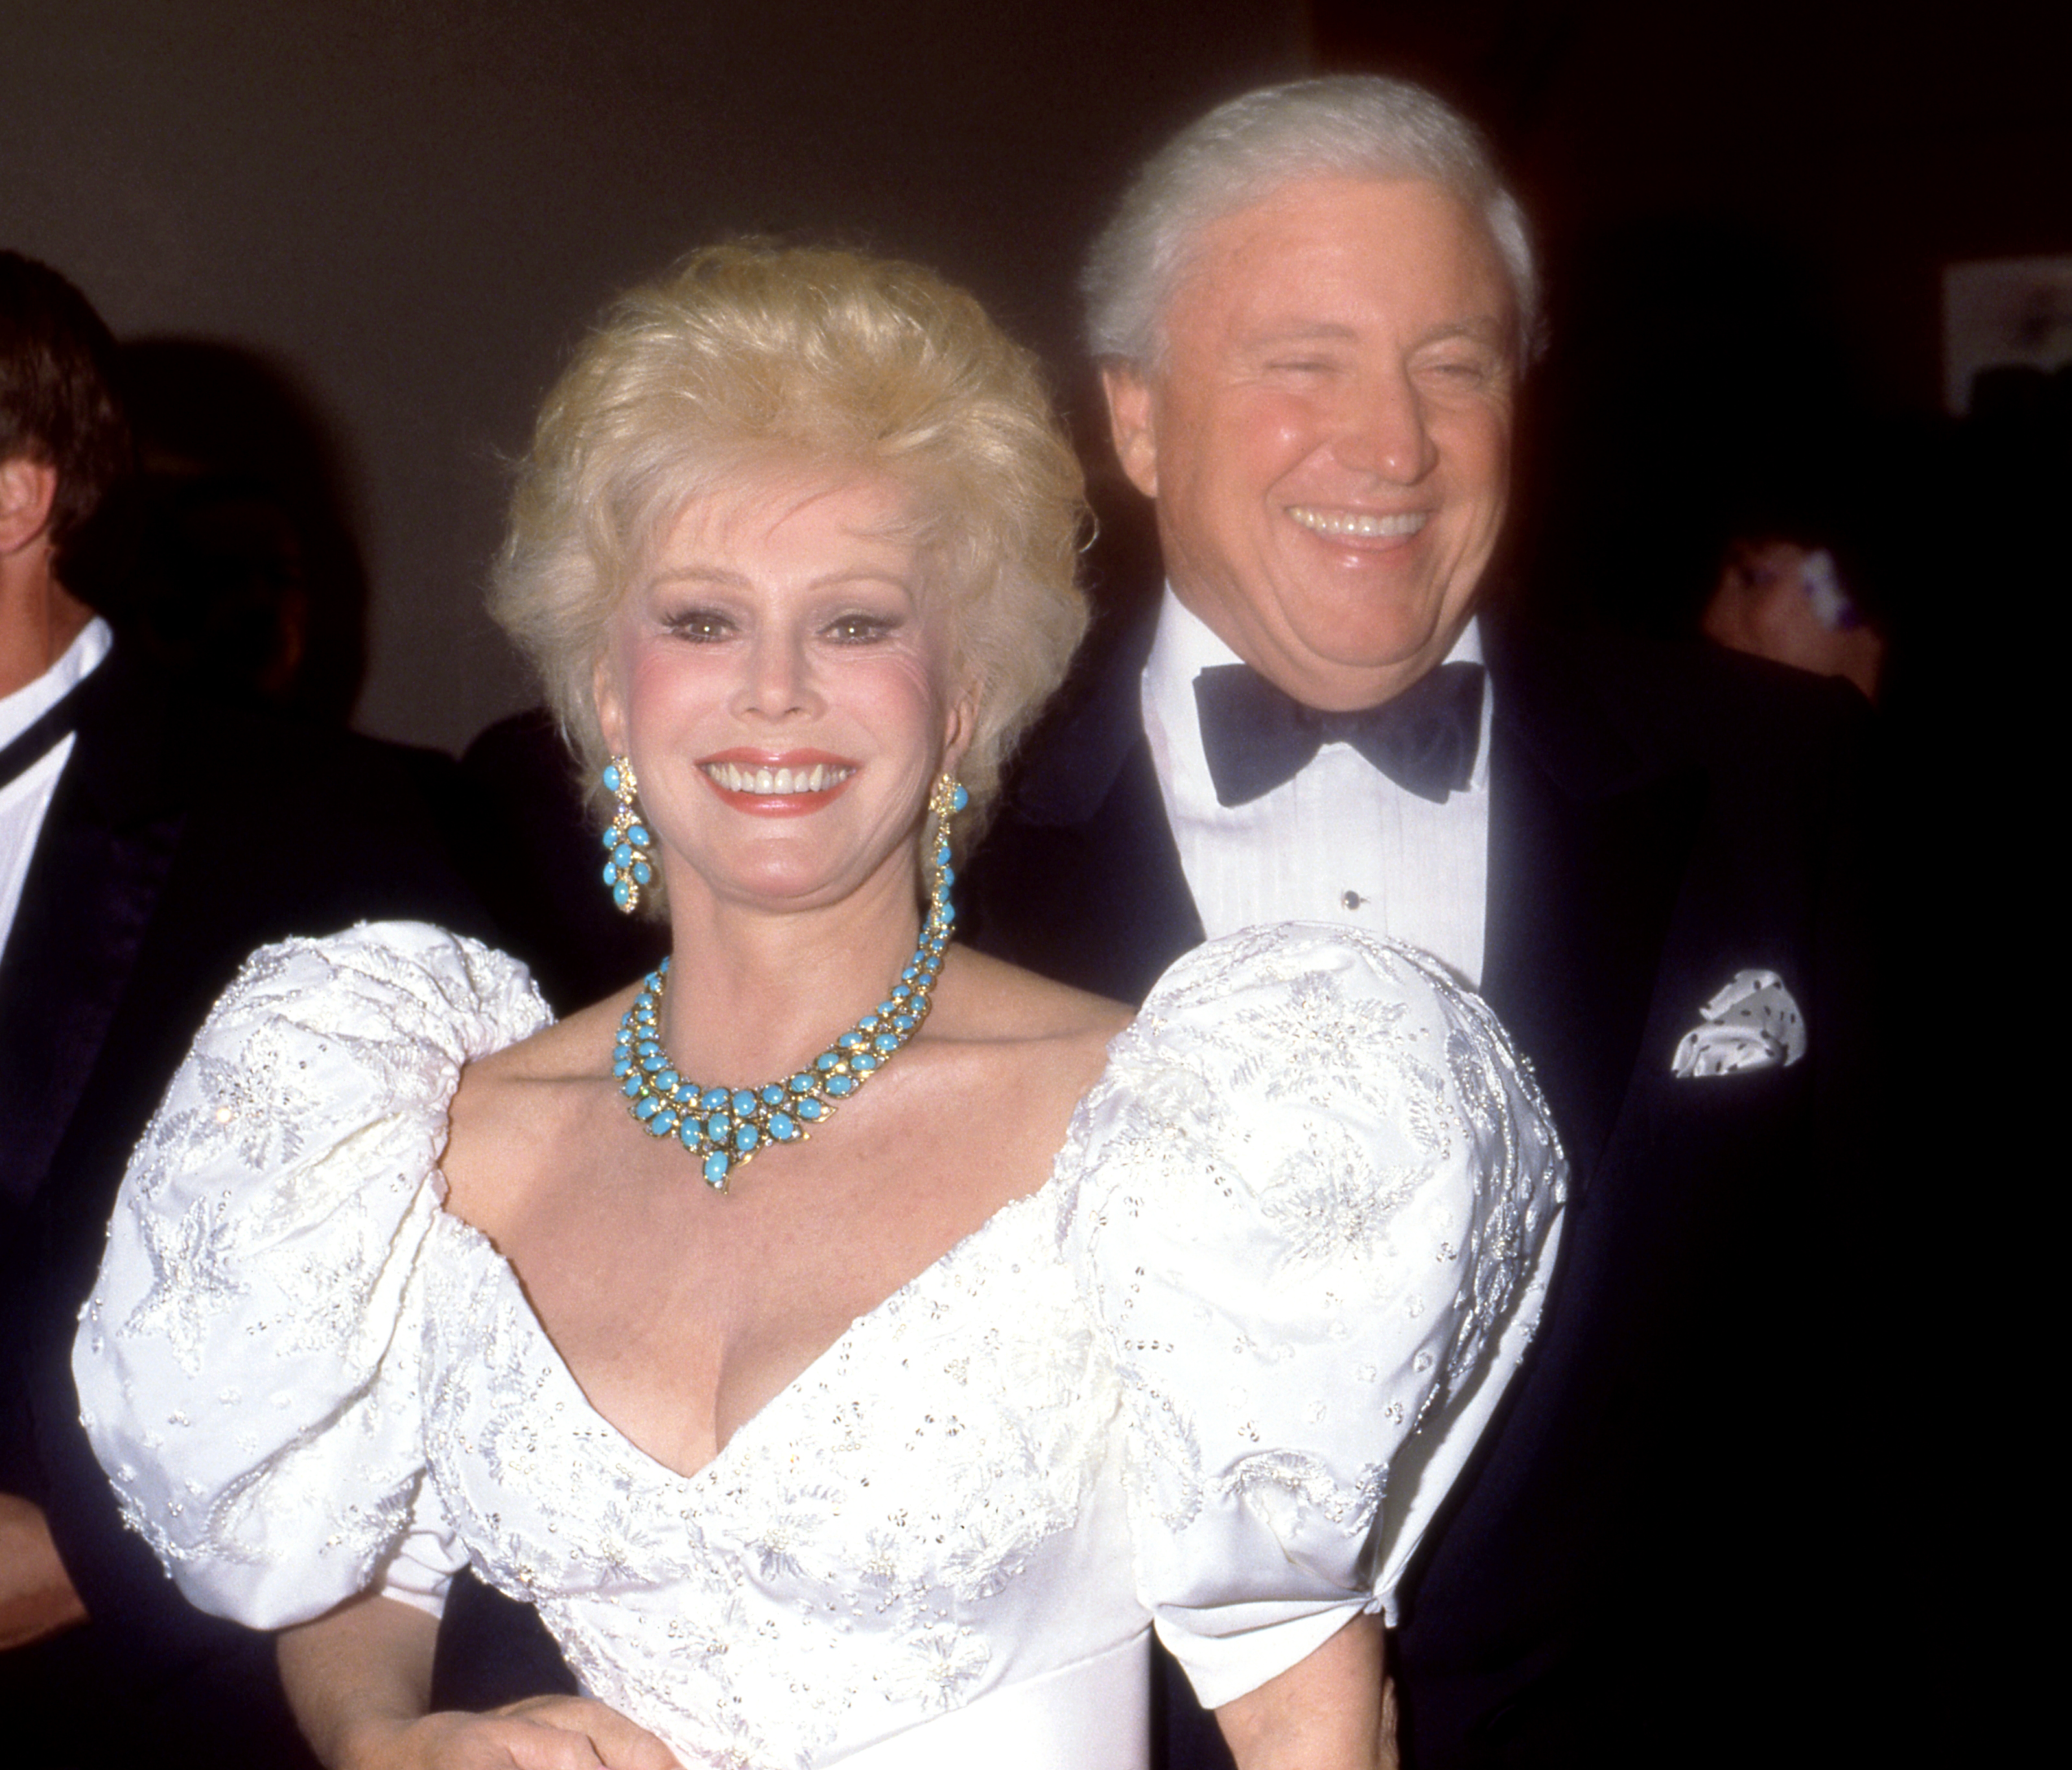 Eva Gabor and Merv Griffin posing for a picture together in Los Angeles 1985 | Source: Getty Images